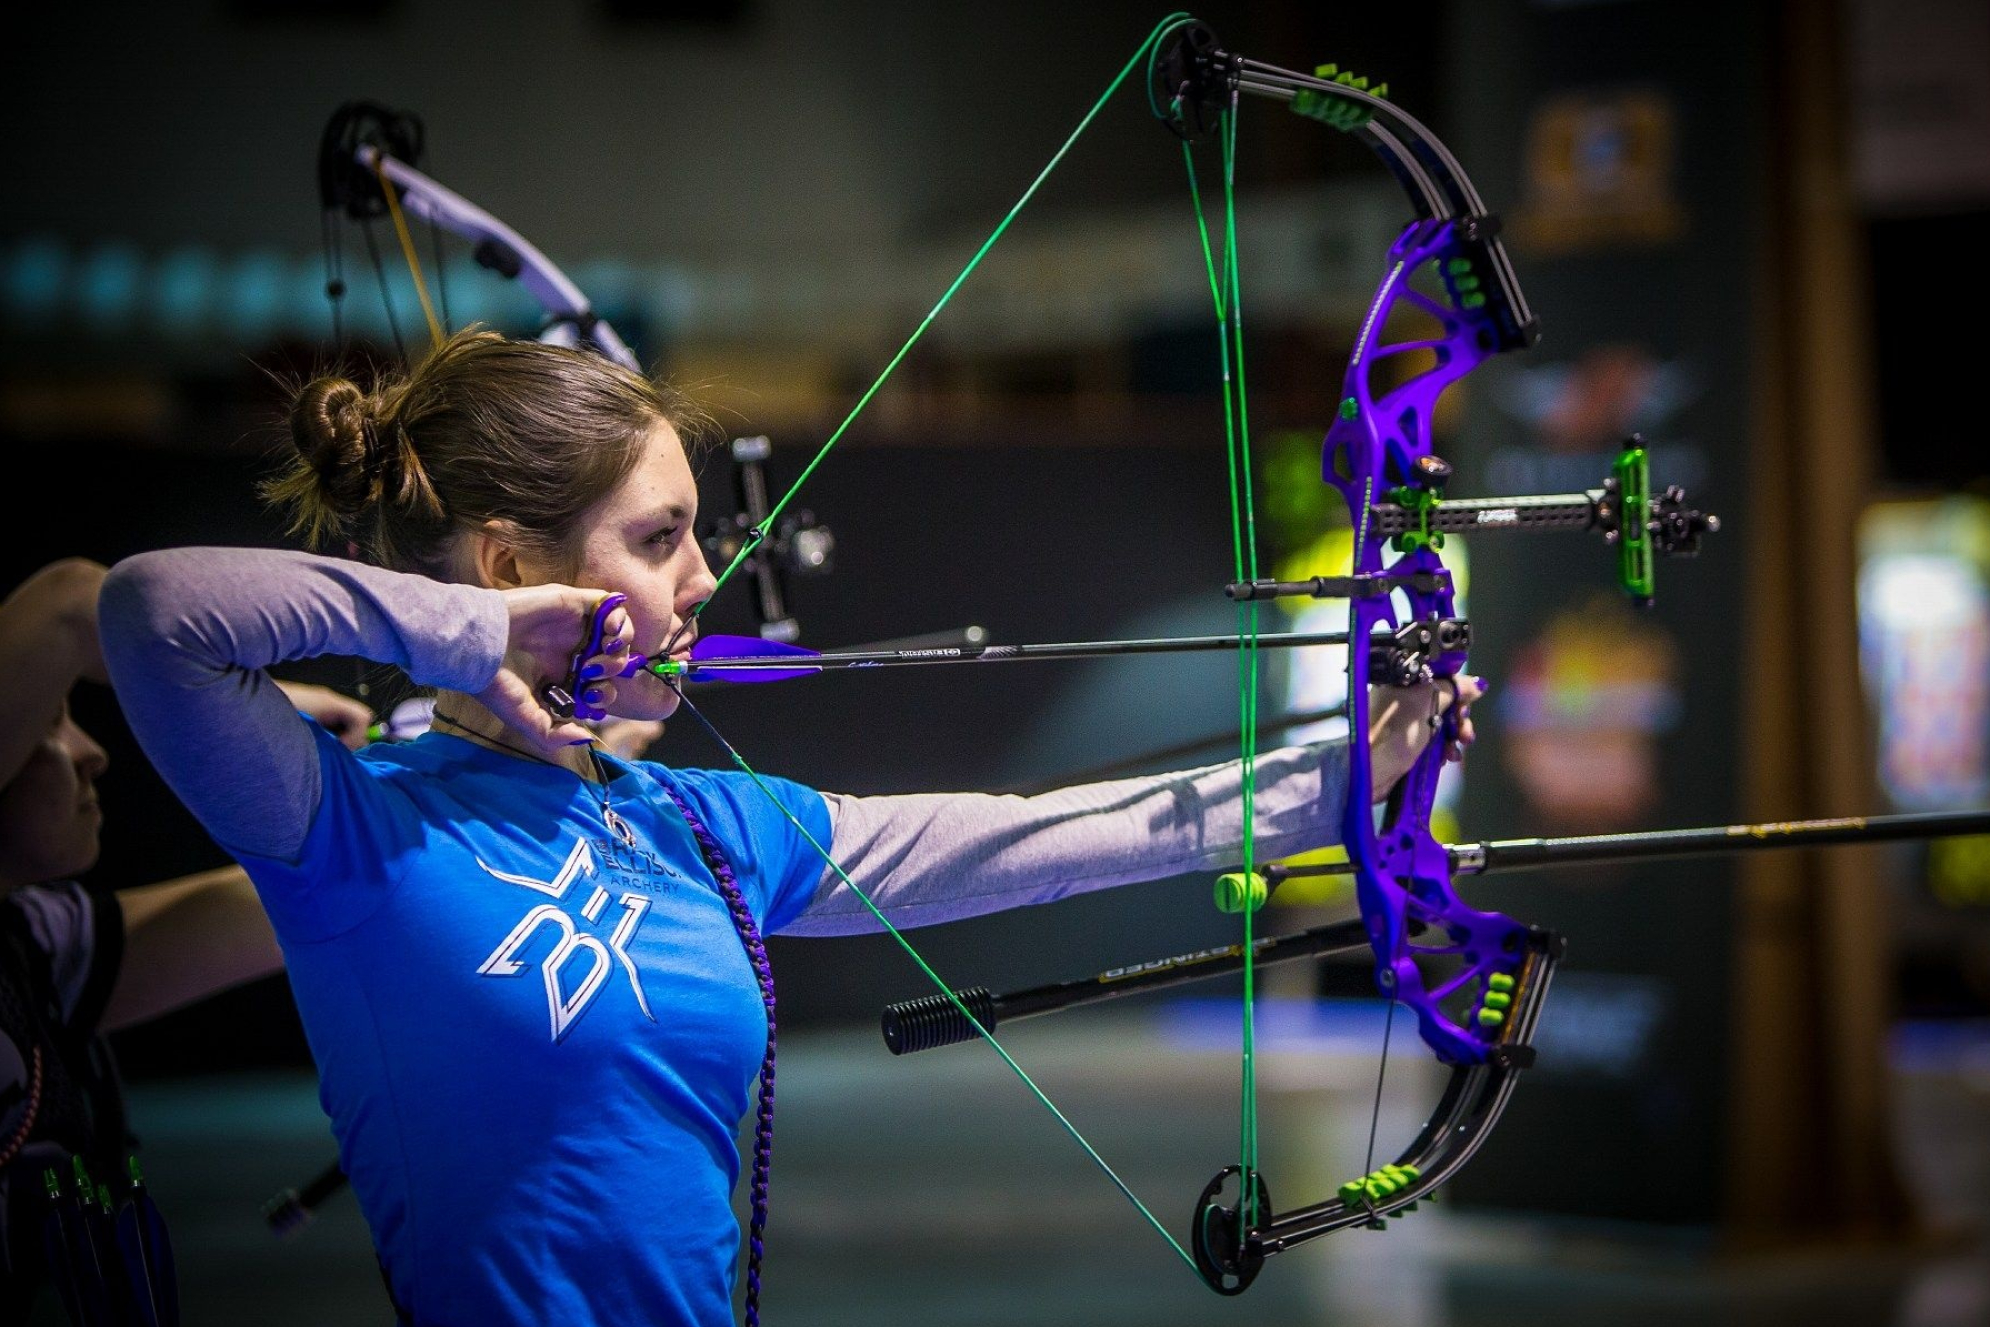 Archery: Compound bow, Target archery, World Archery Federation Competition. 1990x1330 HD Wallpaper.